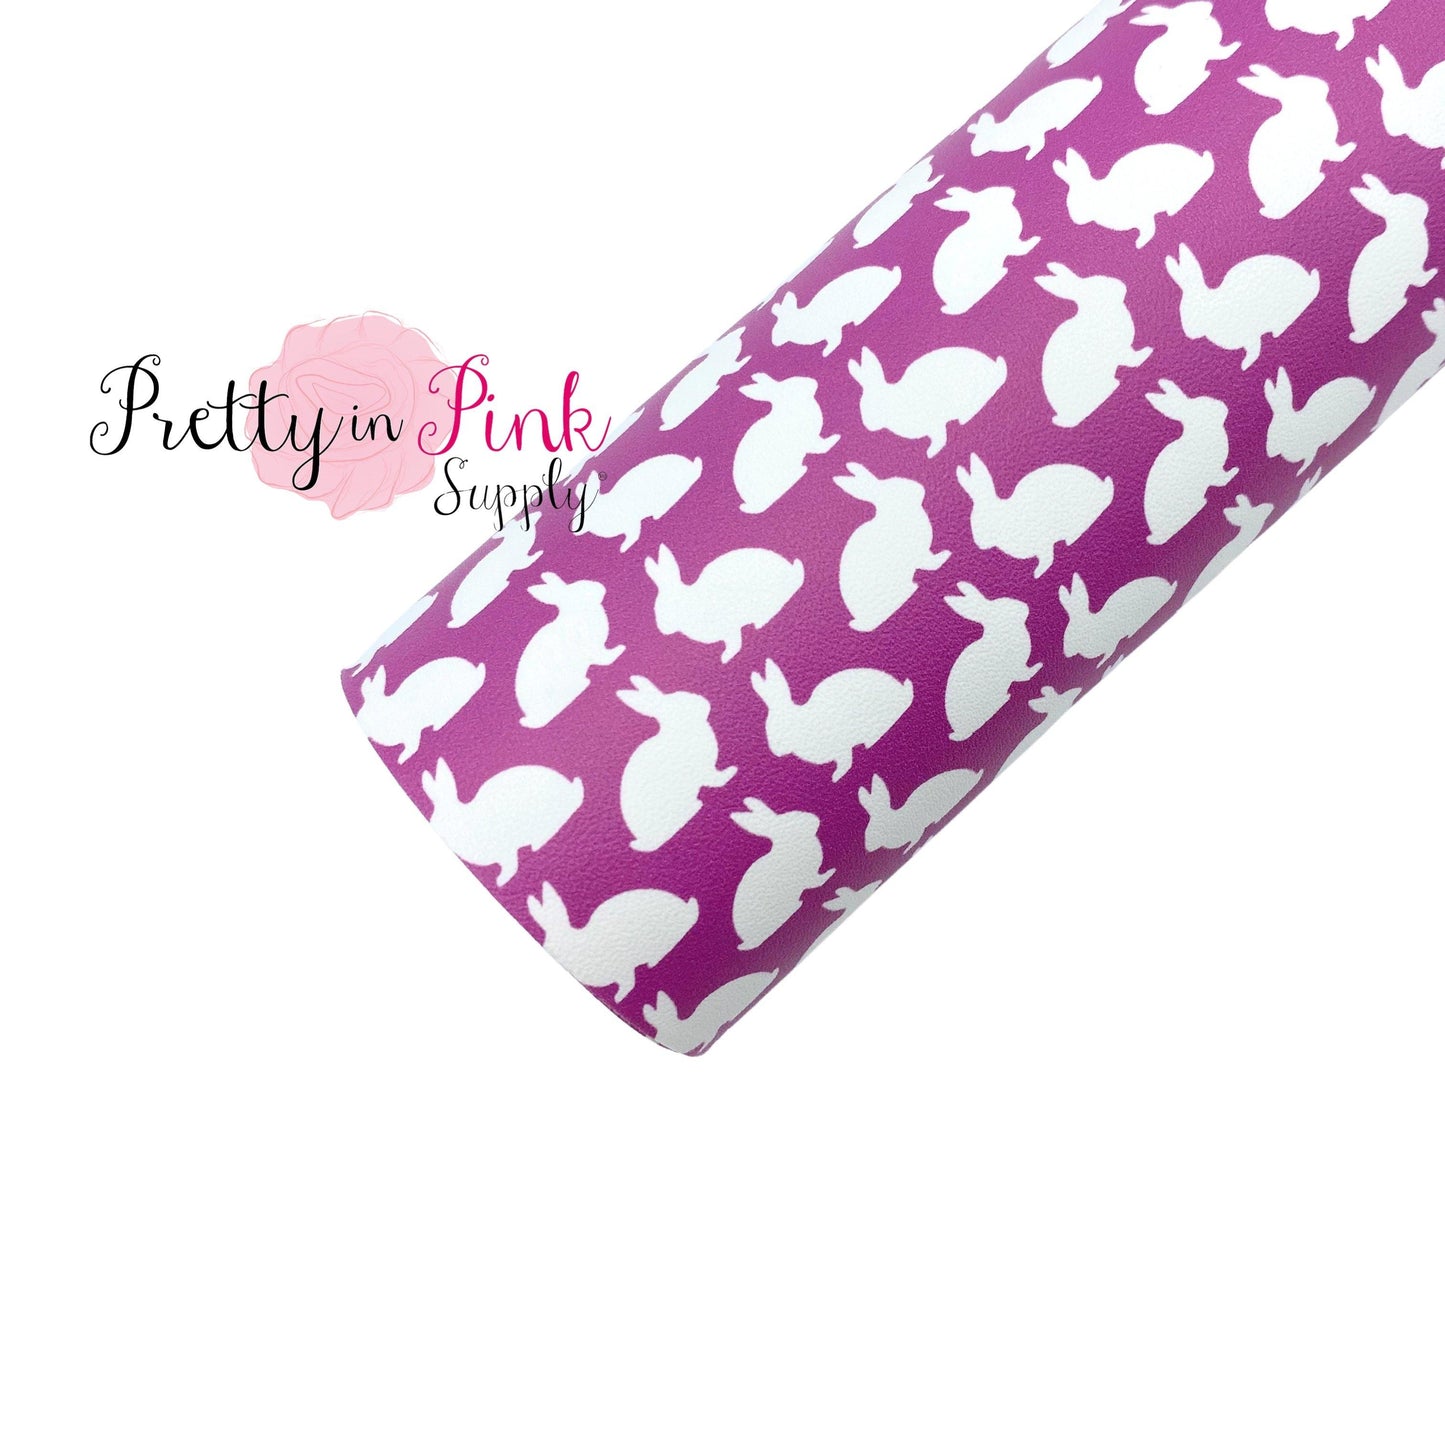 Bunny Silhouette | Faux Leather Fabric Sheet - Pretty in Pink Supply